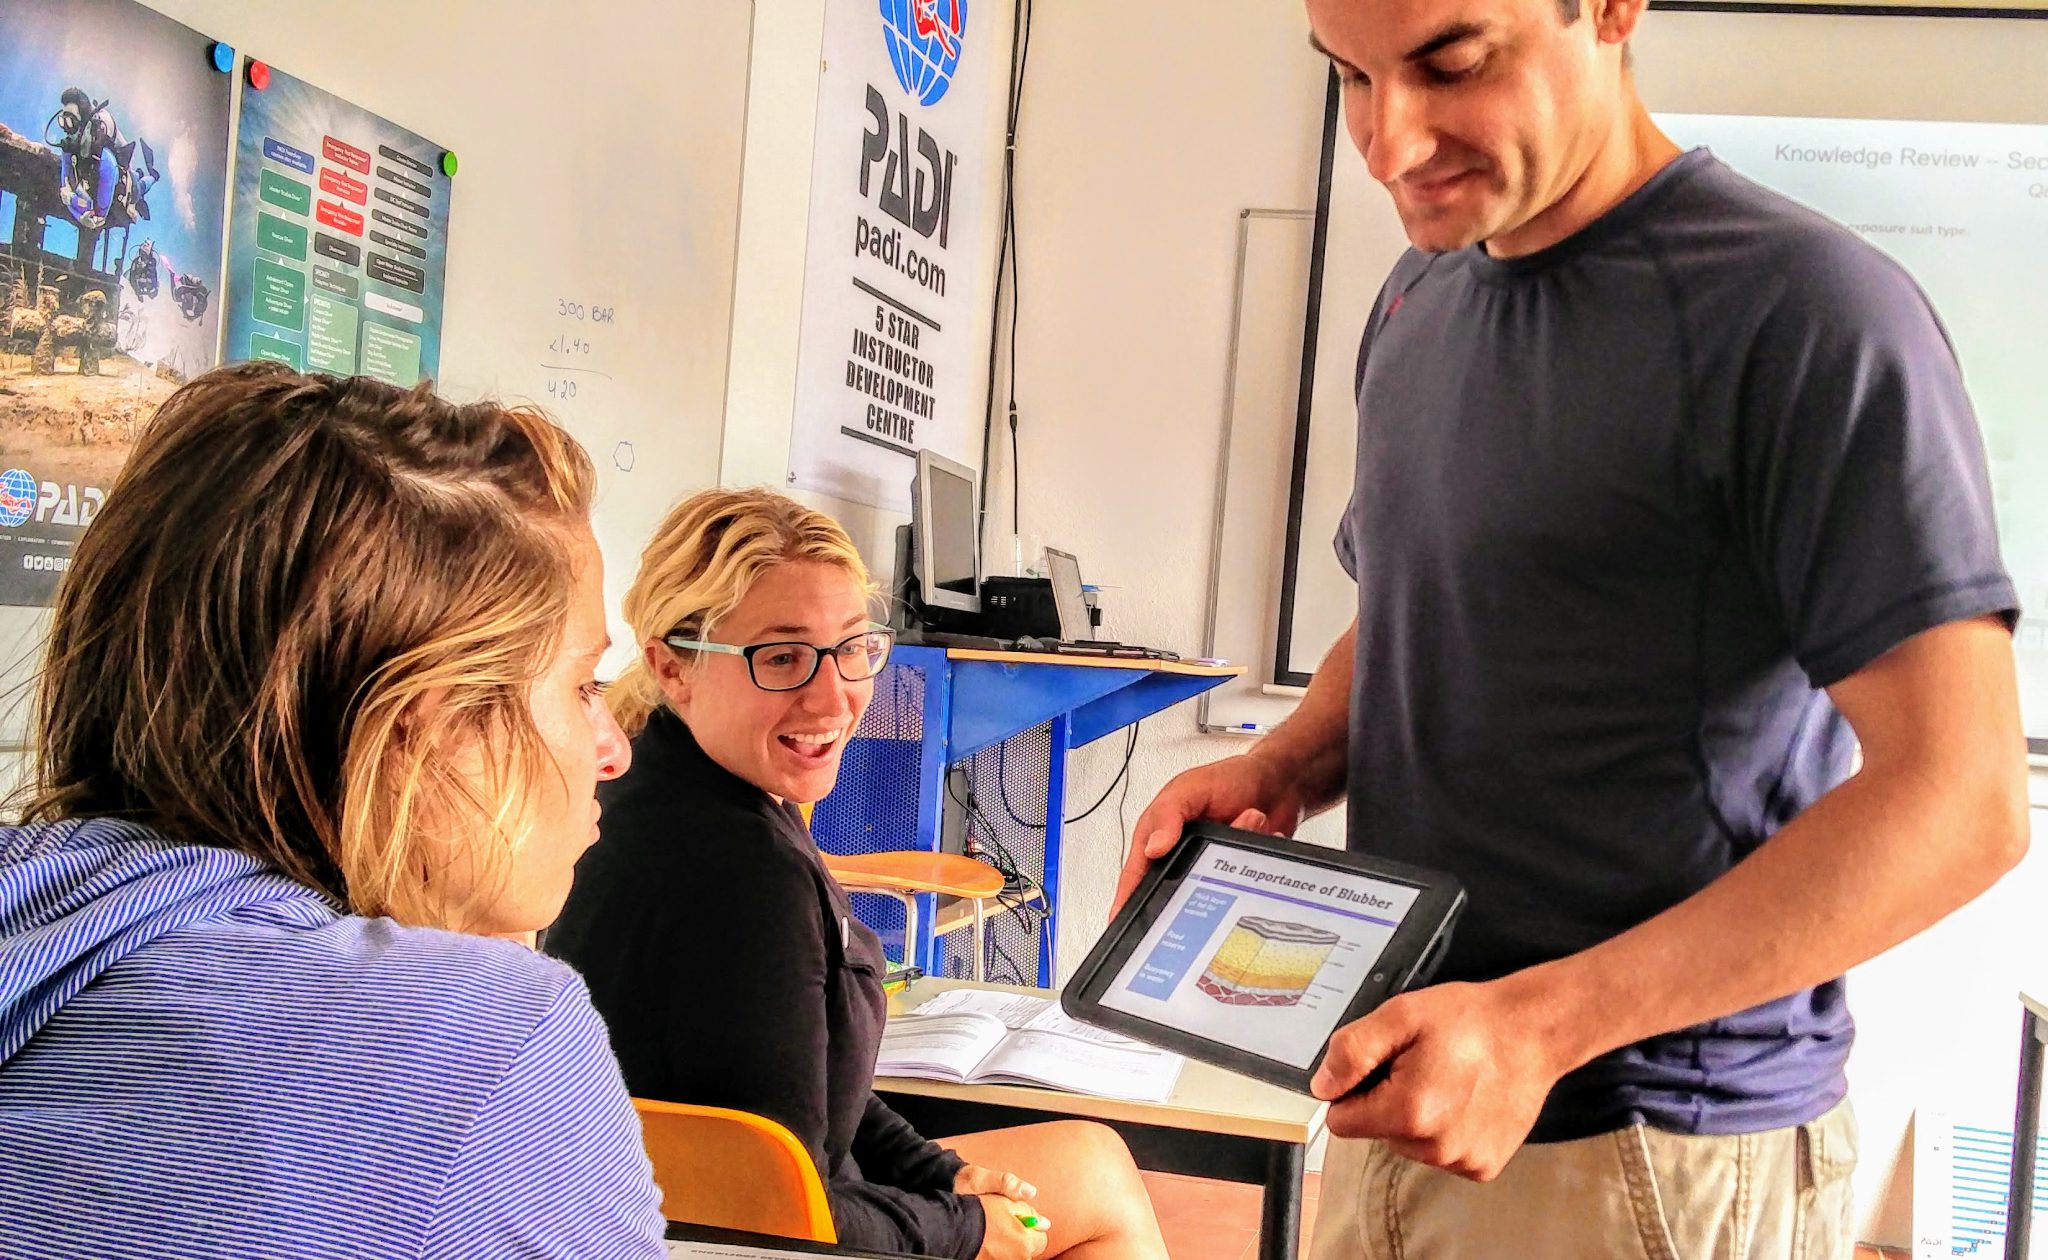 A PADI Instructor explains PADI dive theory to a group of Open Water Diver students who have chosen to learn in the classroom